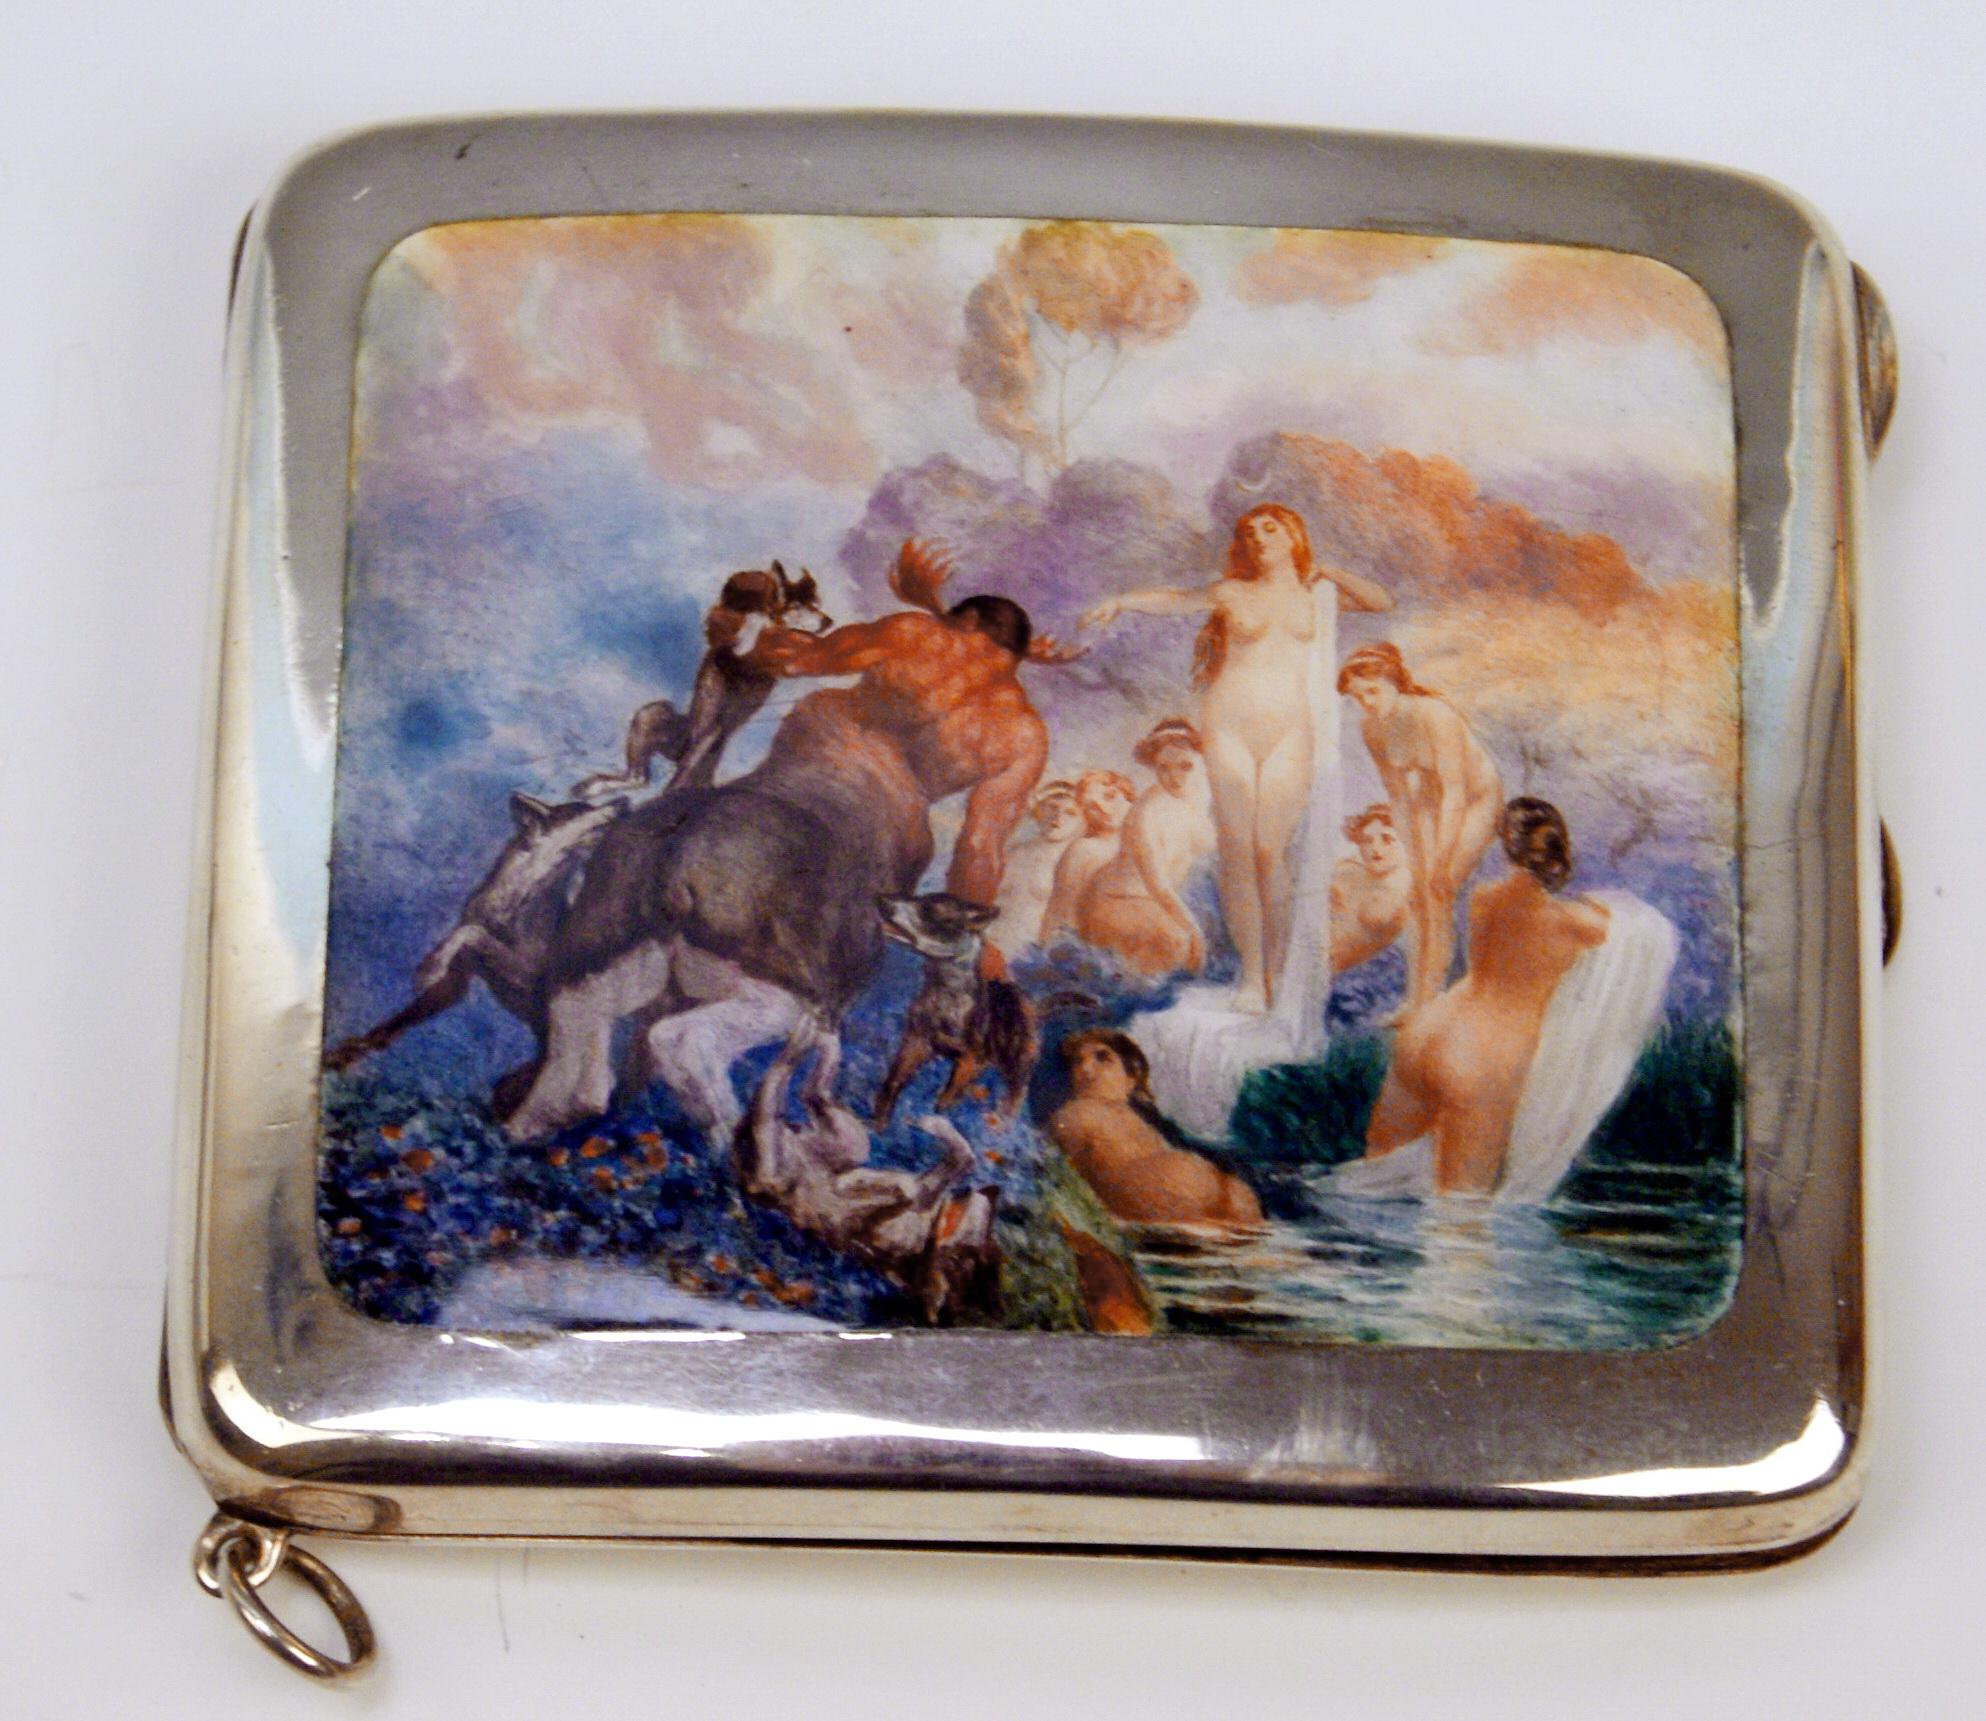 Stunning silver 925 cigarette box / case with enamel painting covering lid:
View of bathing lady nudes surrounding goddess luna: they are looking towards a centaur who is going to save the female nudes from wild pack of hounds or wolves.

The lid is